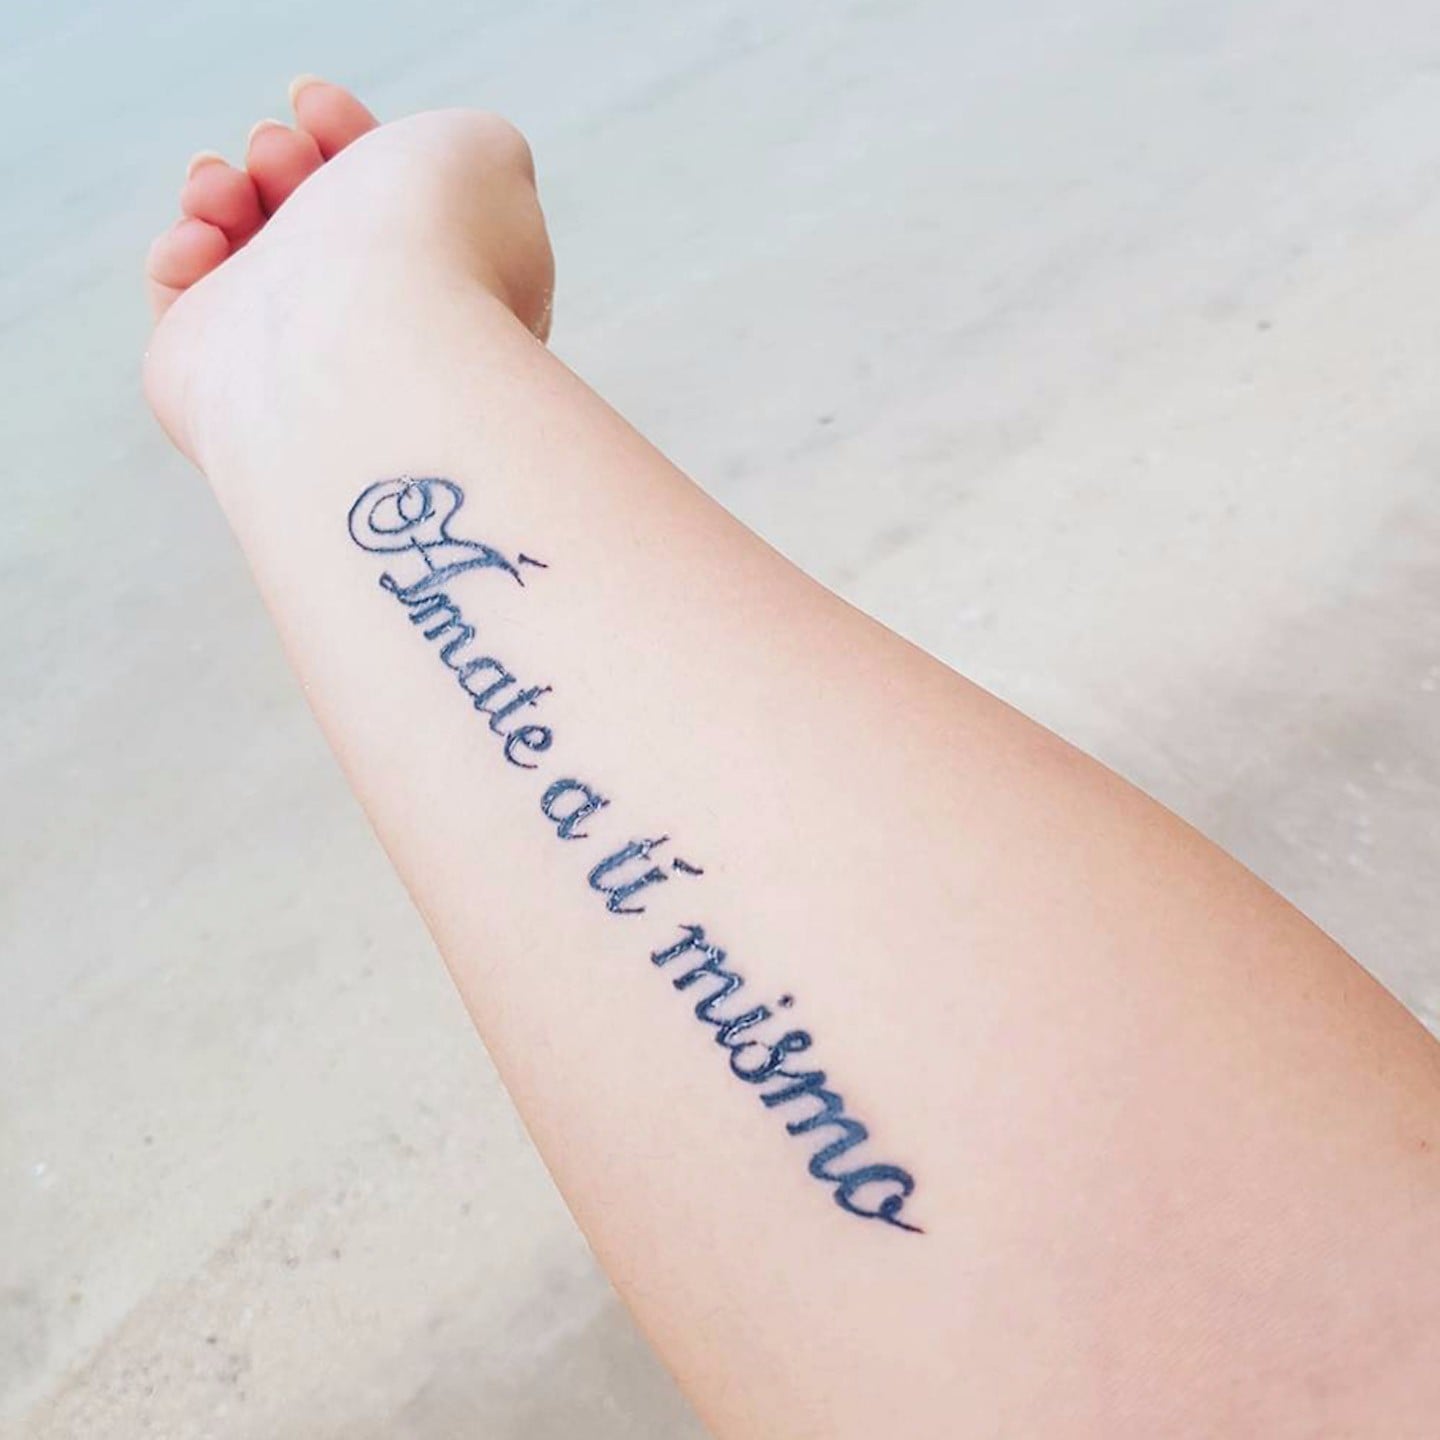 20 Spanish quote tattoos that will fill you with inspiración